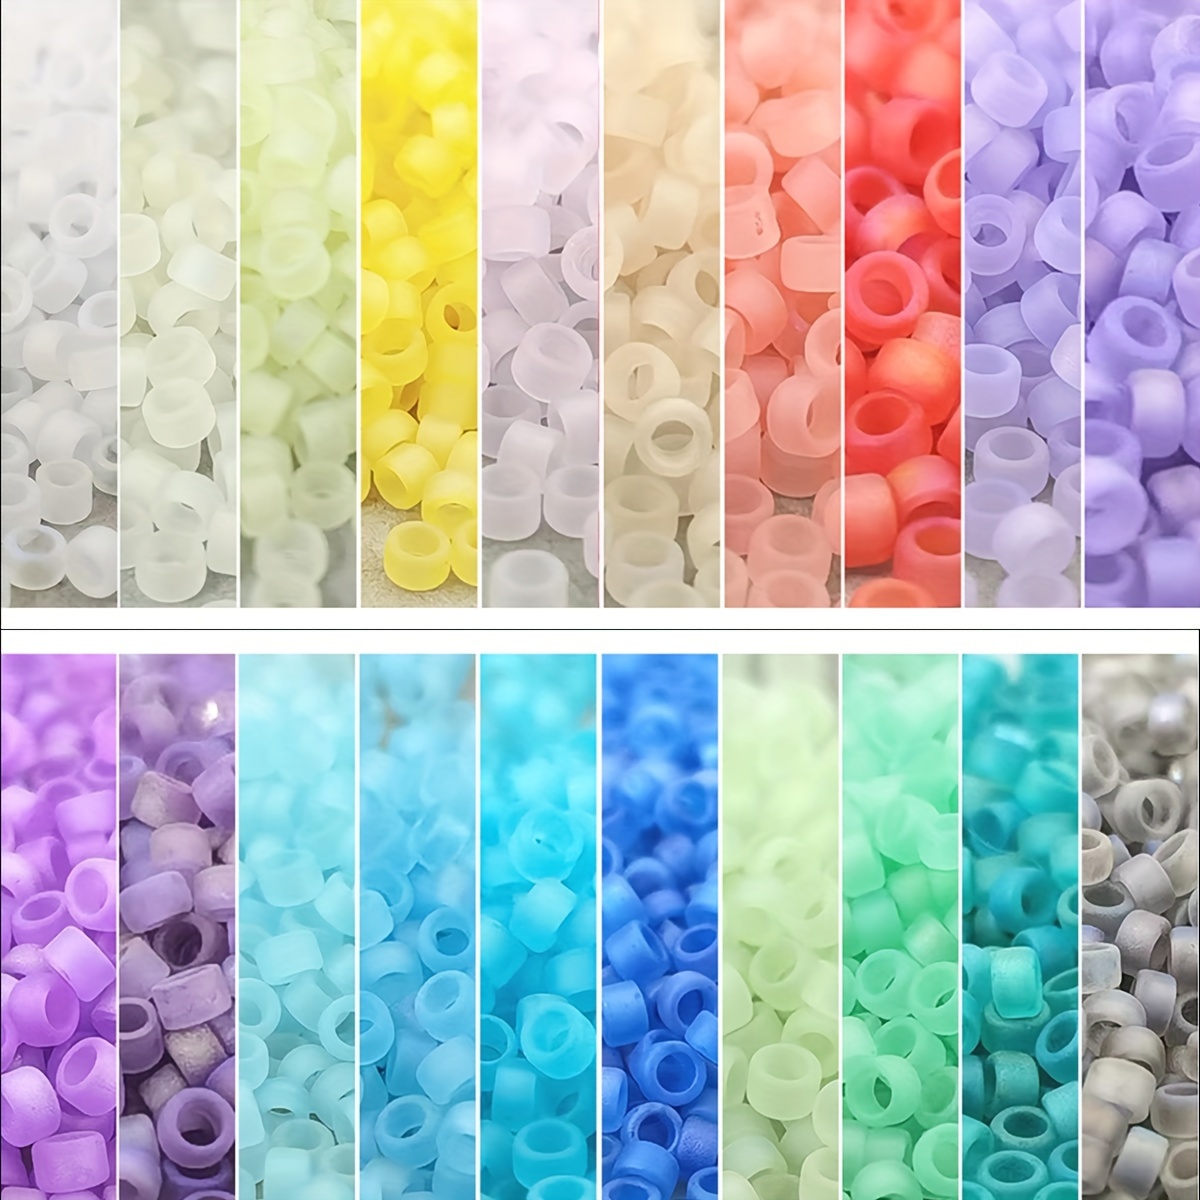 

Diy Jewelry Making Kit: 6850pcs Matte Finish Rice Beads In 20 Colors, 100g (3.52oz) - Ideal For Bracelets, Necklaces & Crafts - Perfect Gift For Moms & Friends